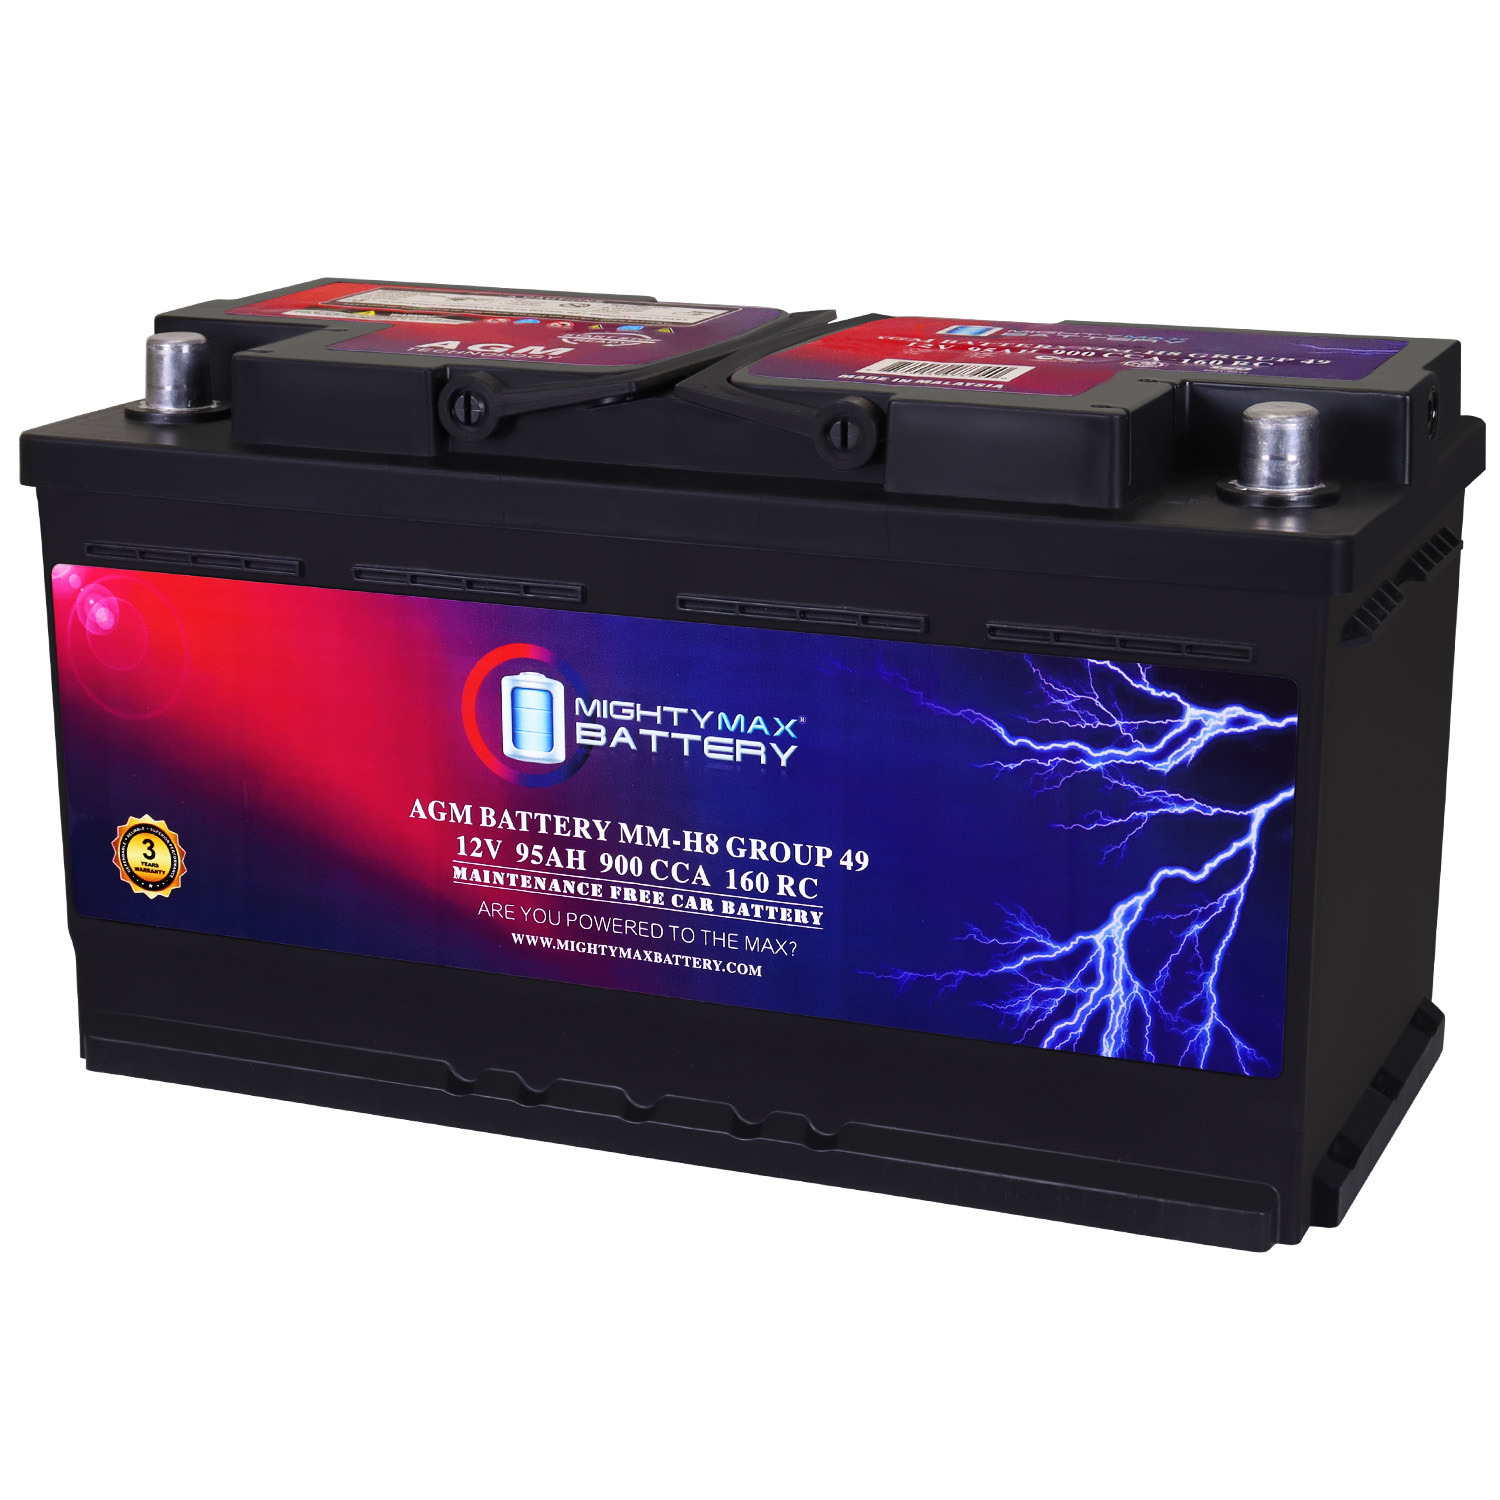 MM-H8 Group 49 12V 95Ah 160RC 900CCA Replacement Battery Compatible with Audi RS 4 07-08